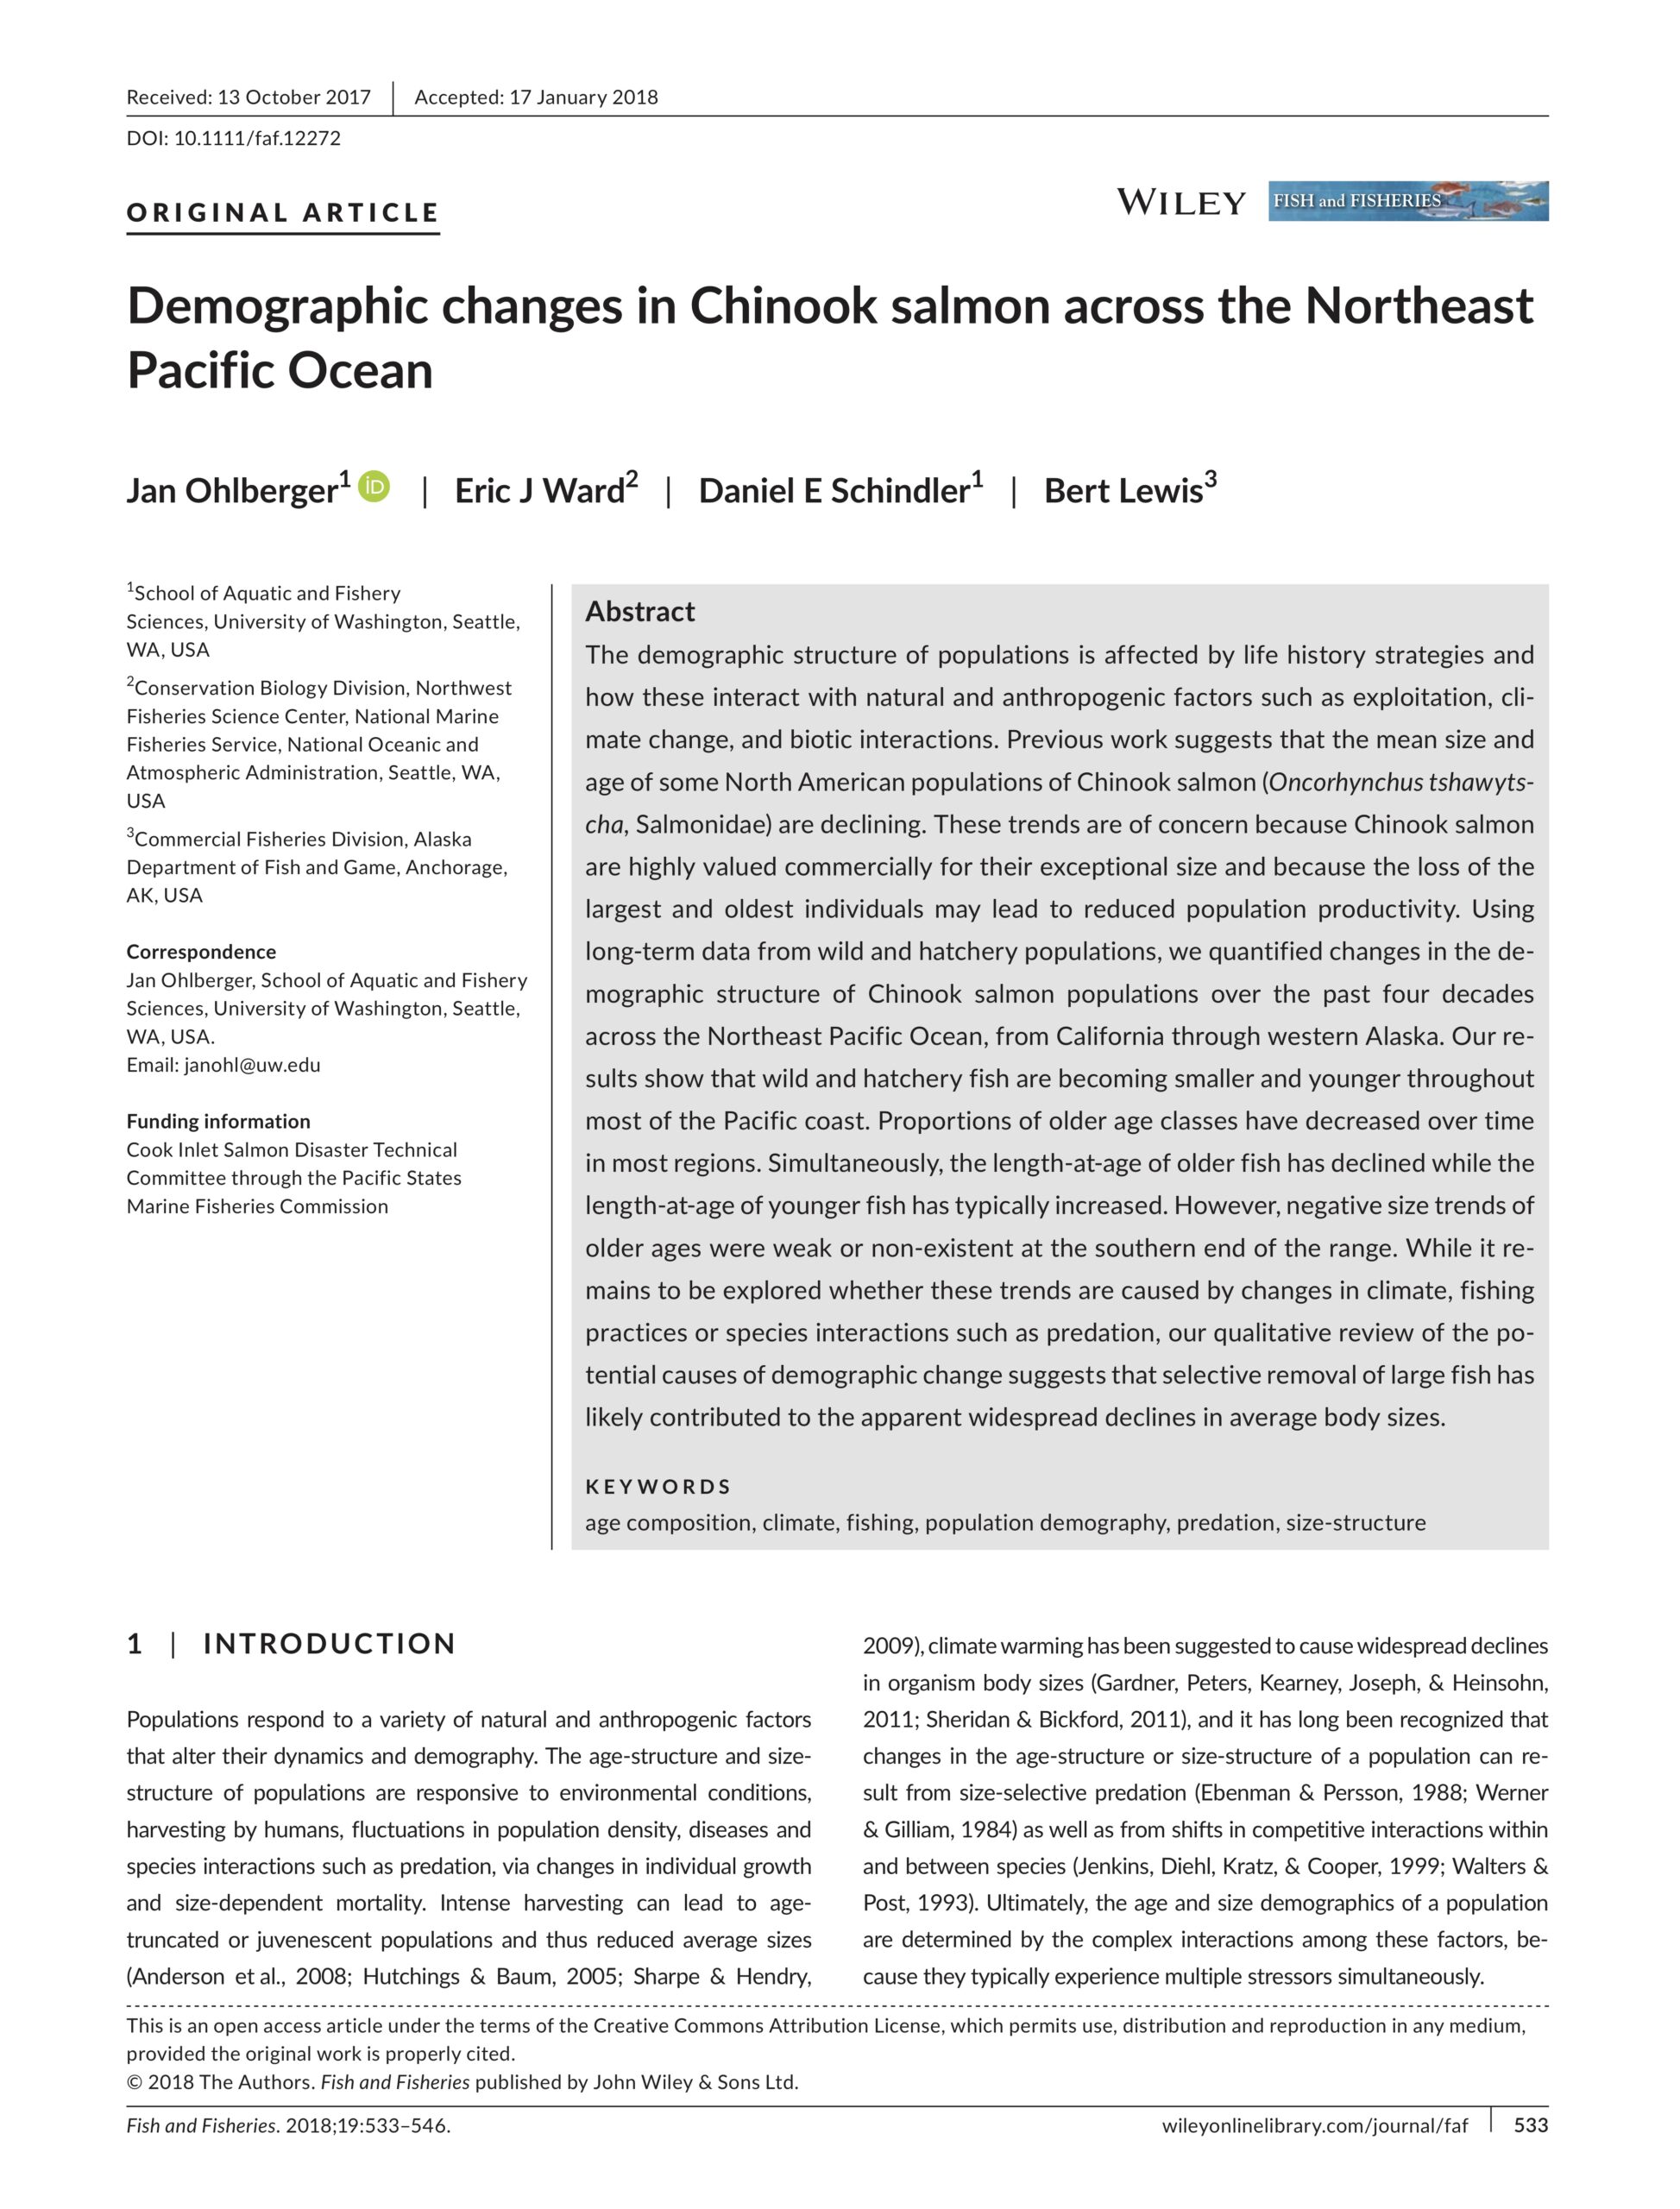 Ohlberger et al. 2018: Demographic changes in Chinook salmon across the Northeast Pacific Ocean